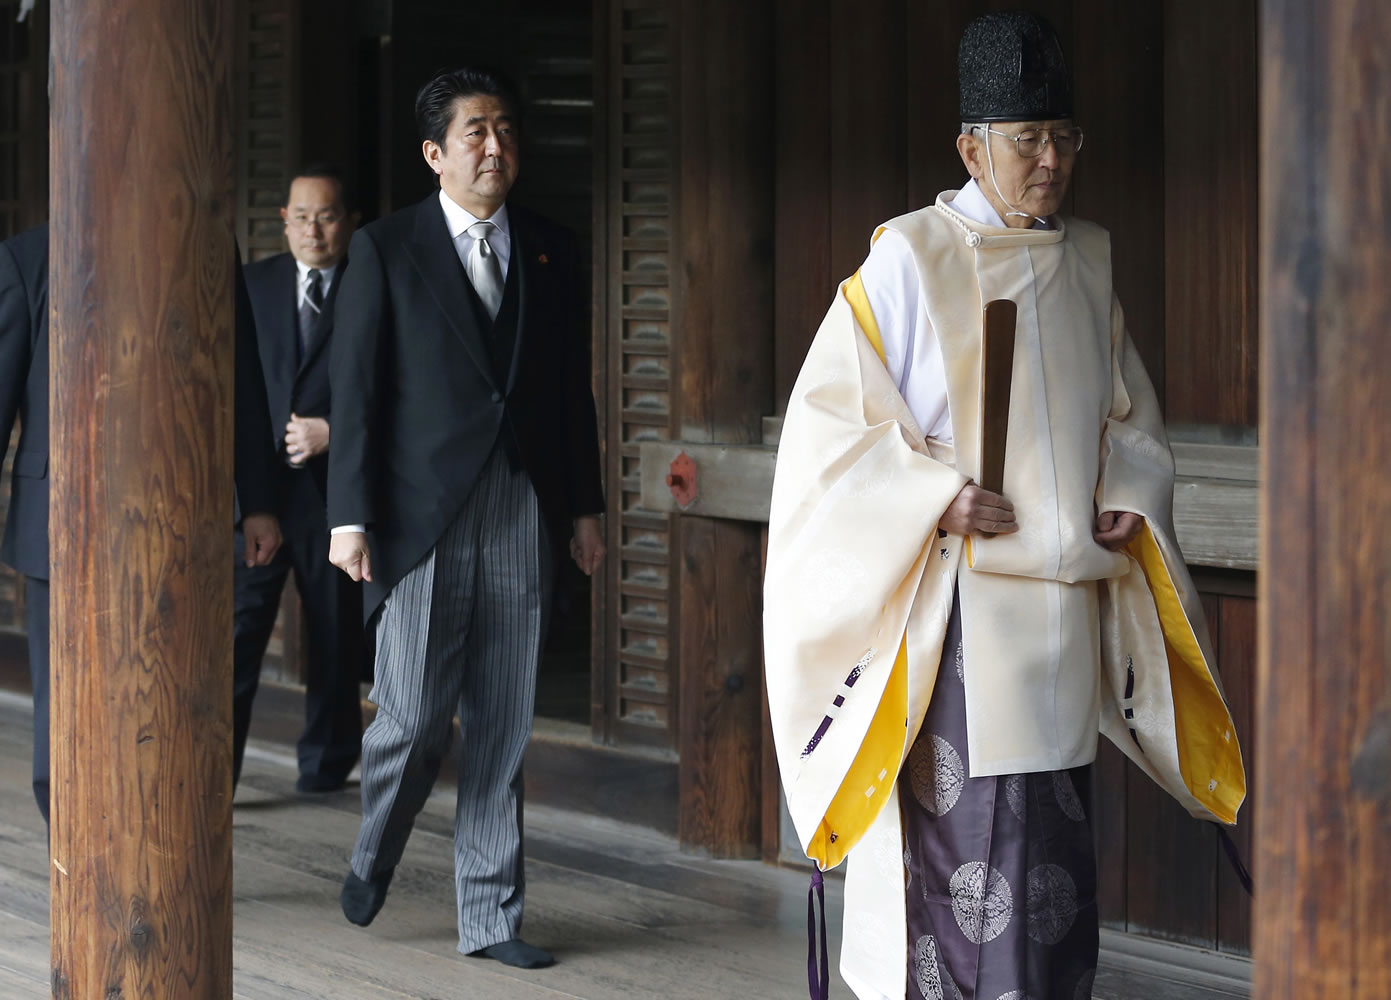 Japanese Prime Minister Shinzo Abe, second from right, follows a Shinto priest to pay respect for the war dead at Yasukuni Shrine in Tokyo on Thursday.